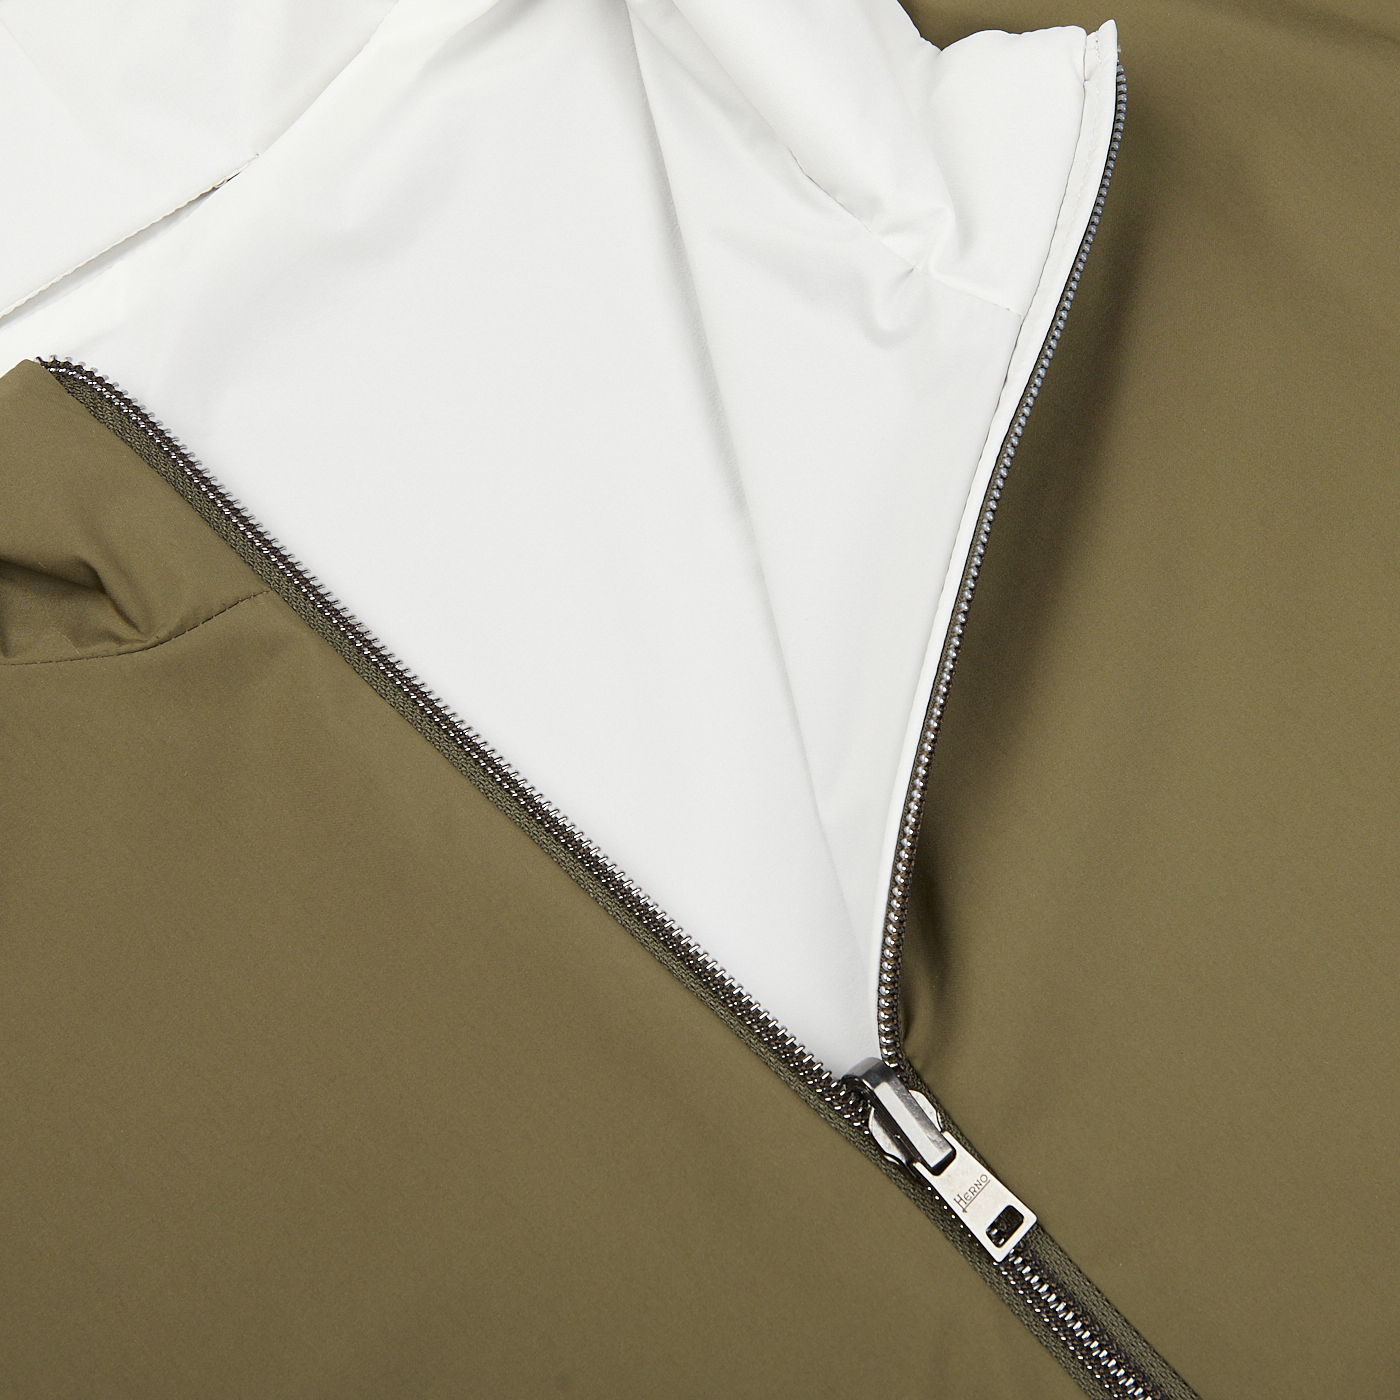 Close-up of a partially zipped Herno Olive Green White Reversible Nylon Blouson with a white interior lining and an olive green, water-resistant nylon exterior.